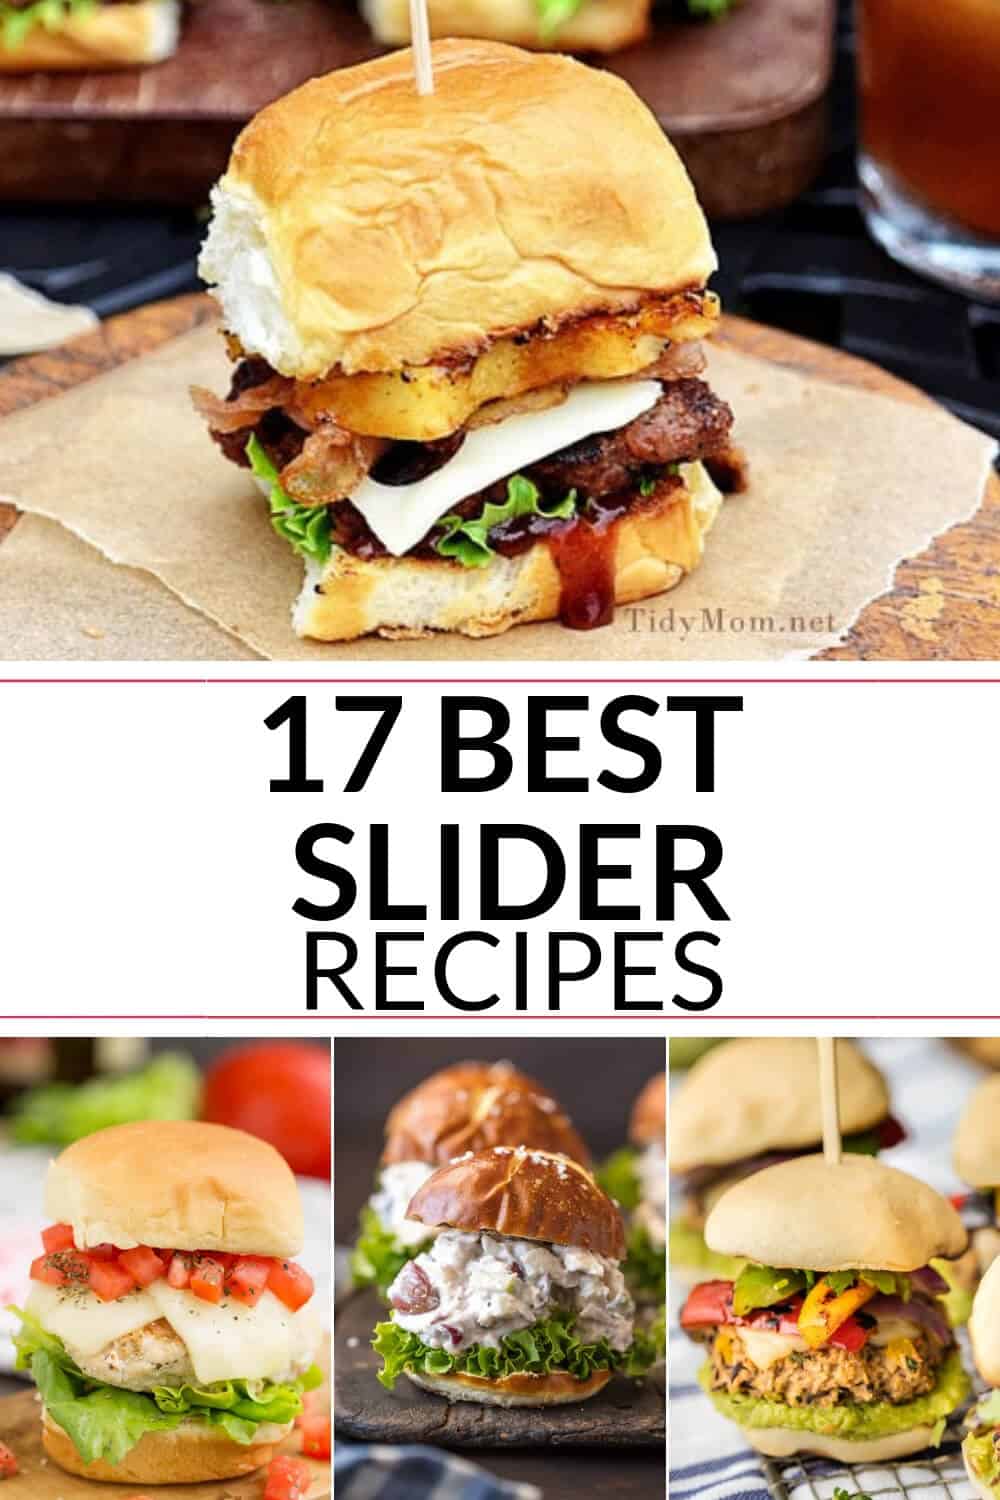 A collection of the best slider recipes